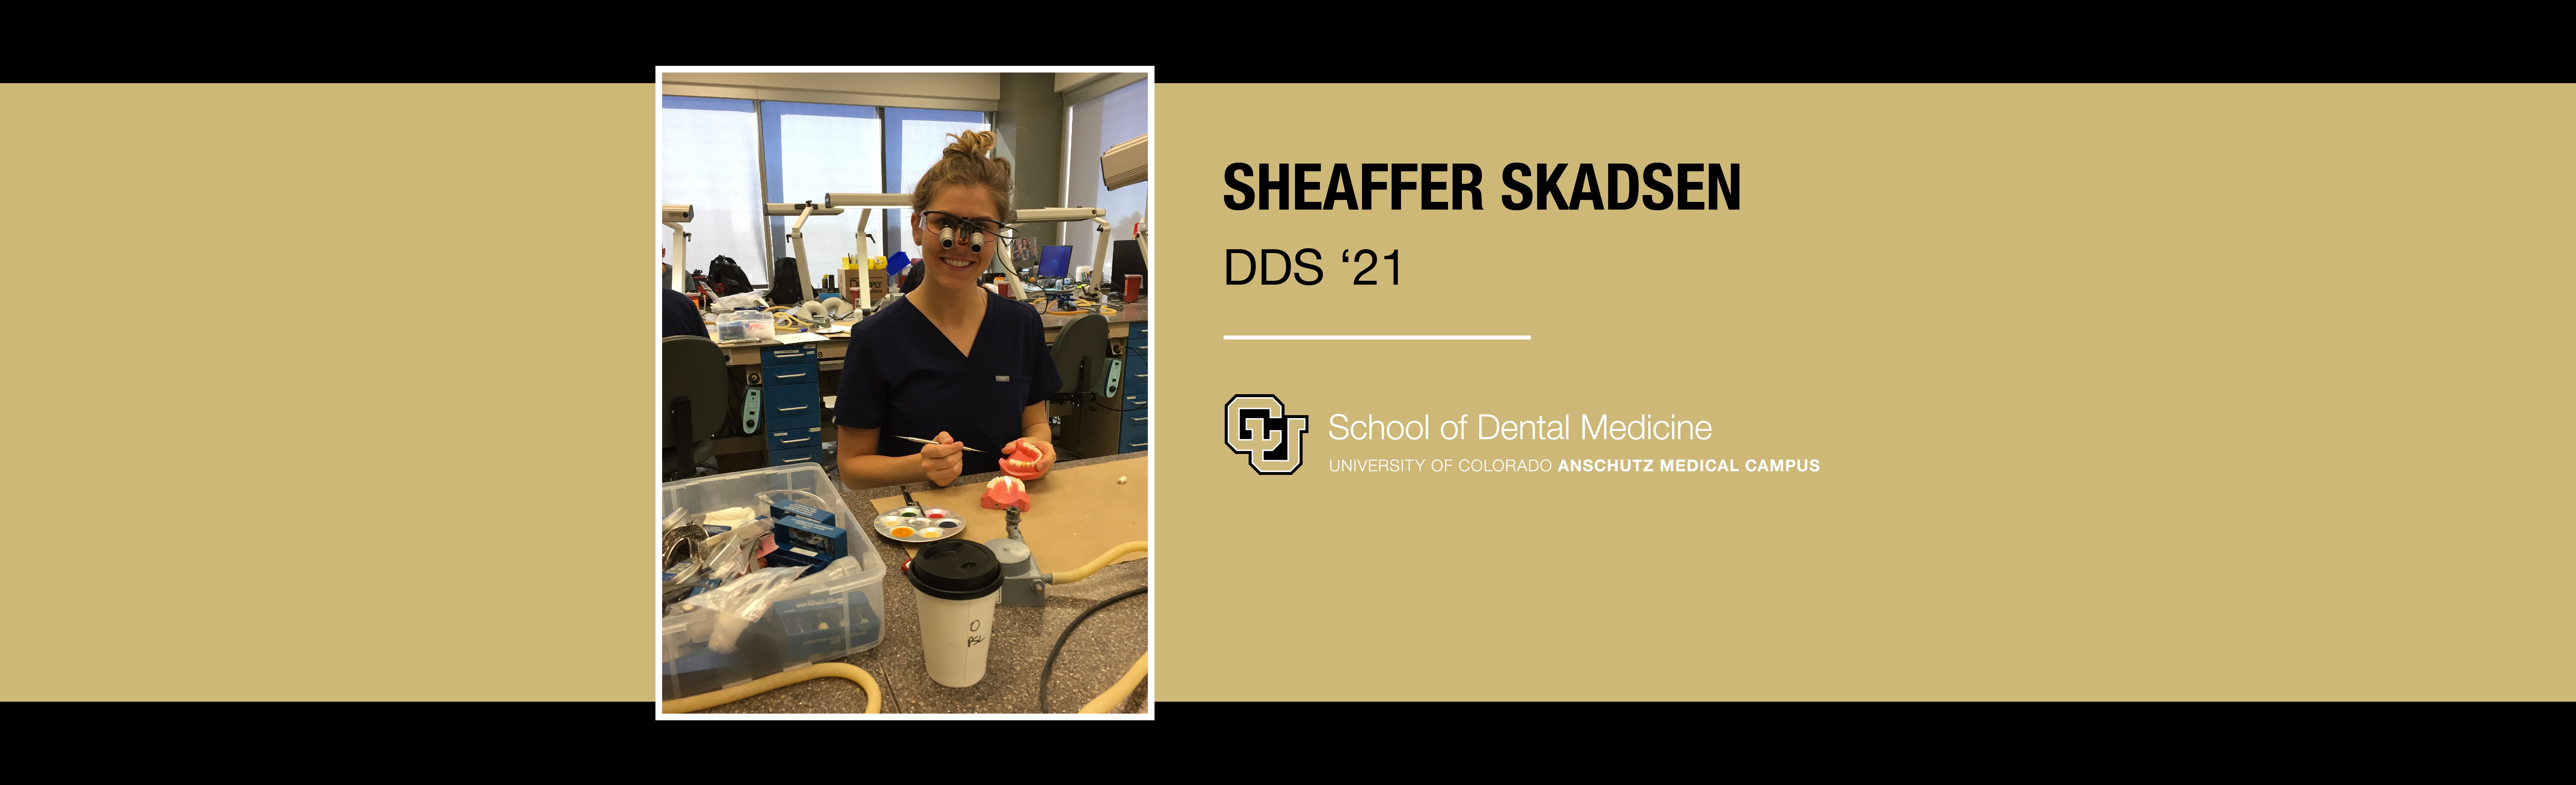 Sheaffer Skadsen pictured in dental lab next to text of her name and CU logo